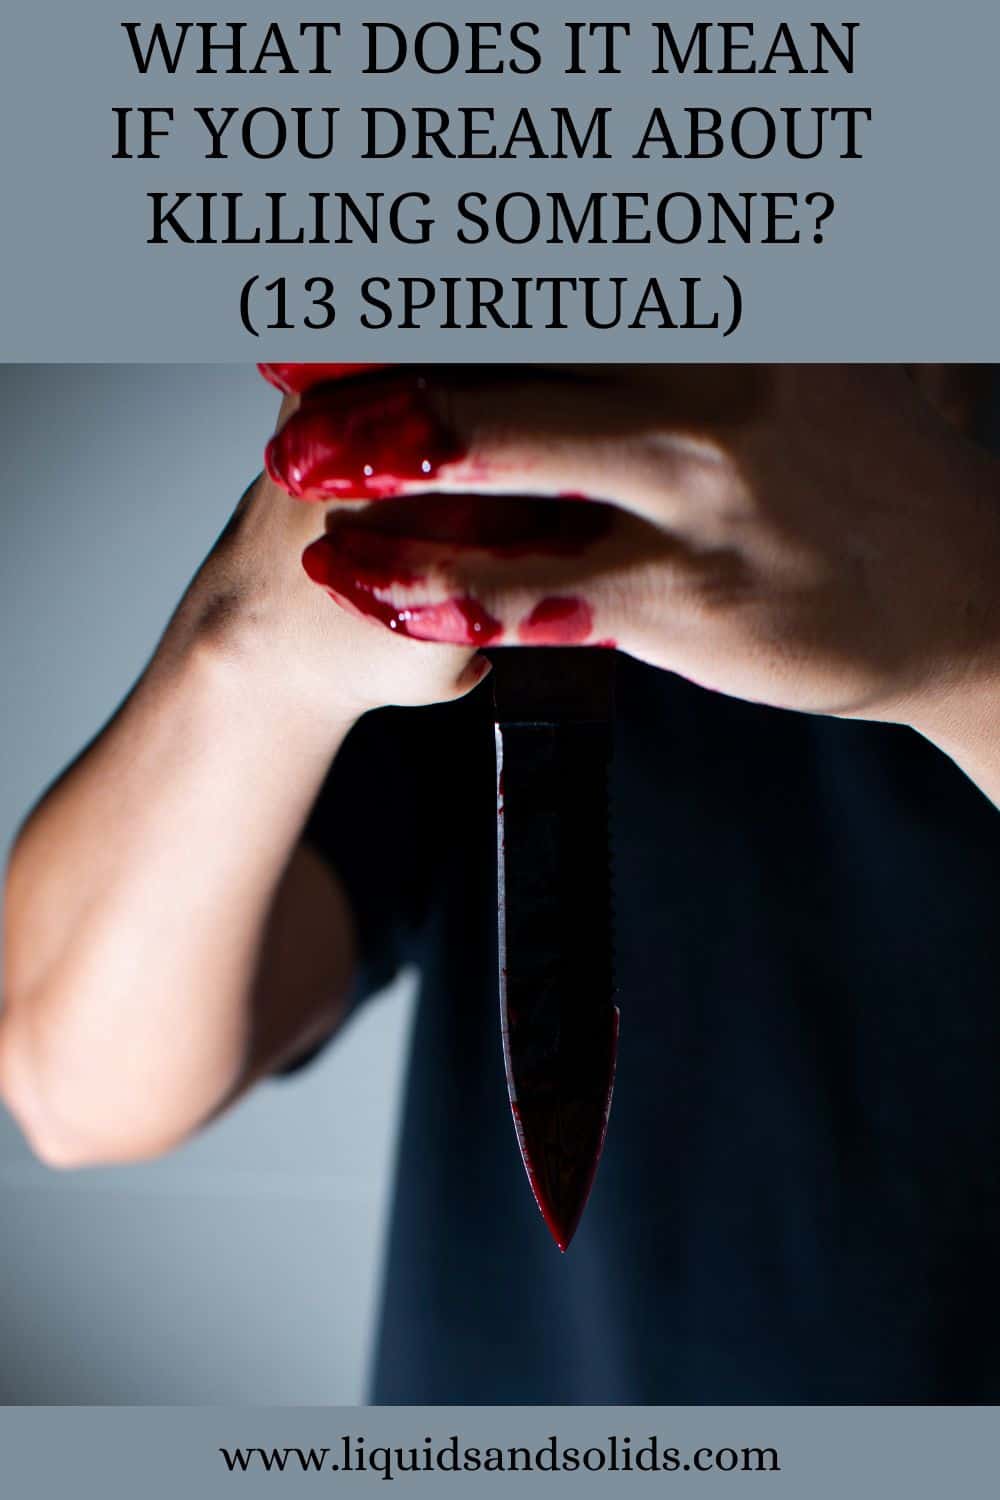 What Does It Mean If You Dream About Killing Someone(13 Spiritual)